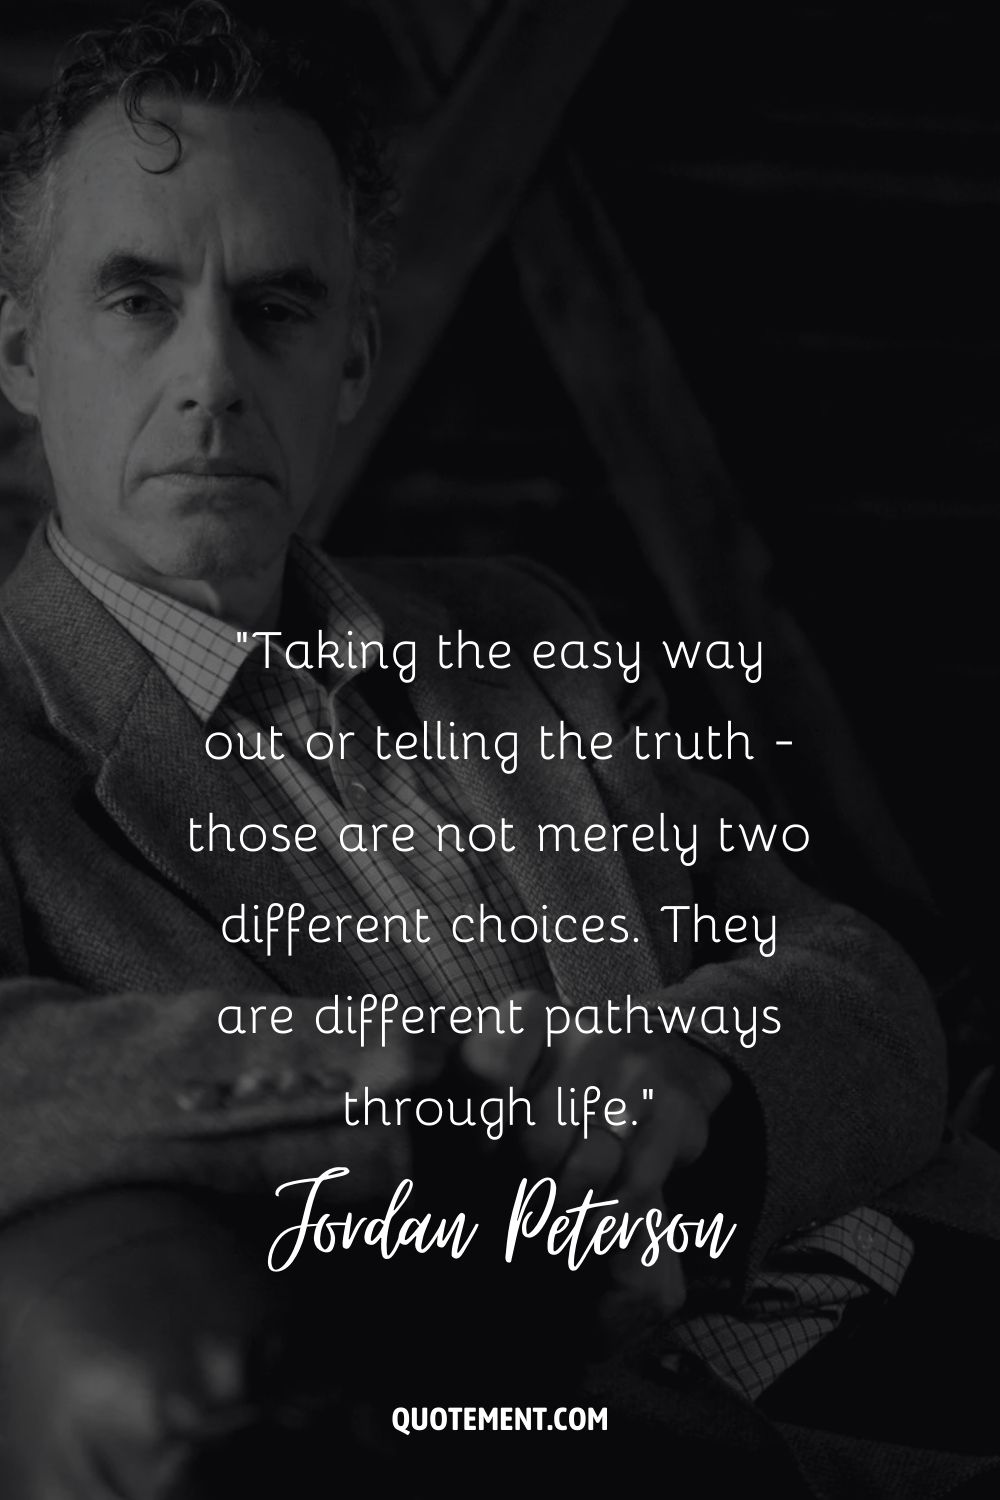 Taking the easy way out or telling the truth - those are not merely two different choices. They are different pathways through life